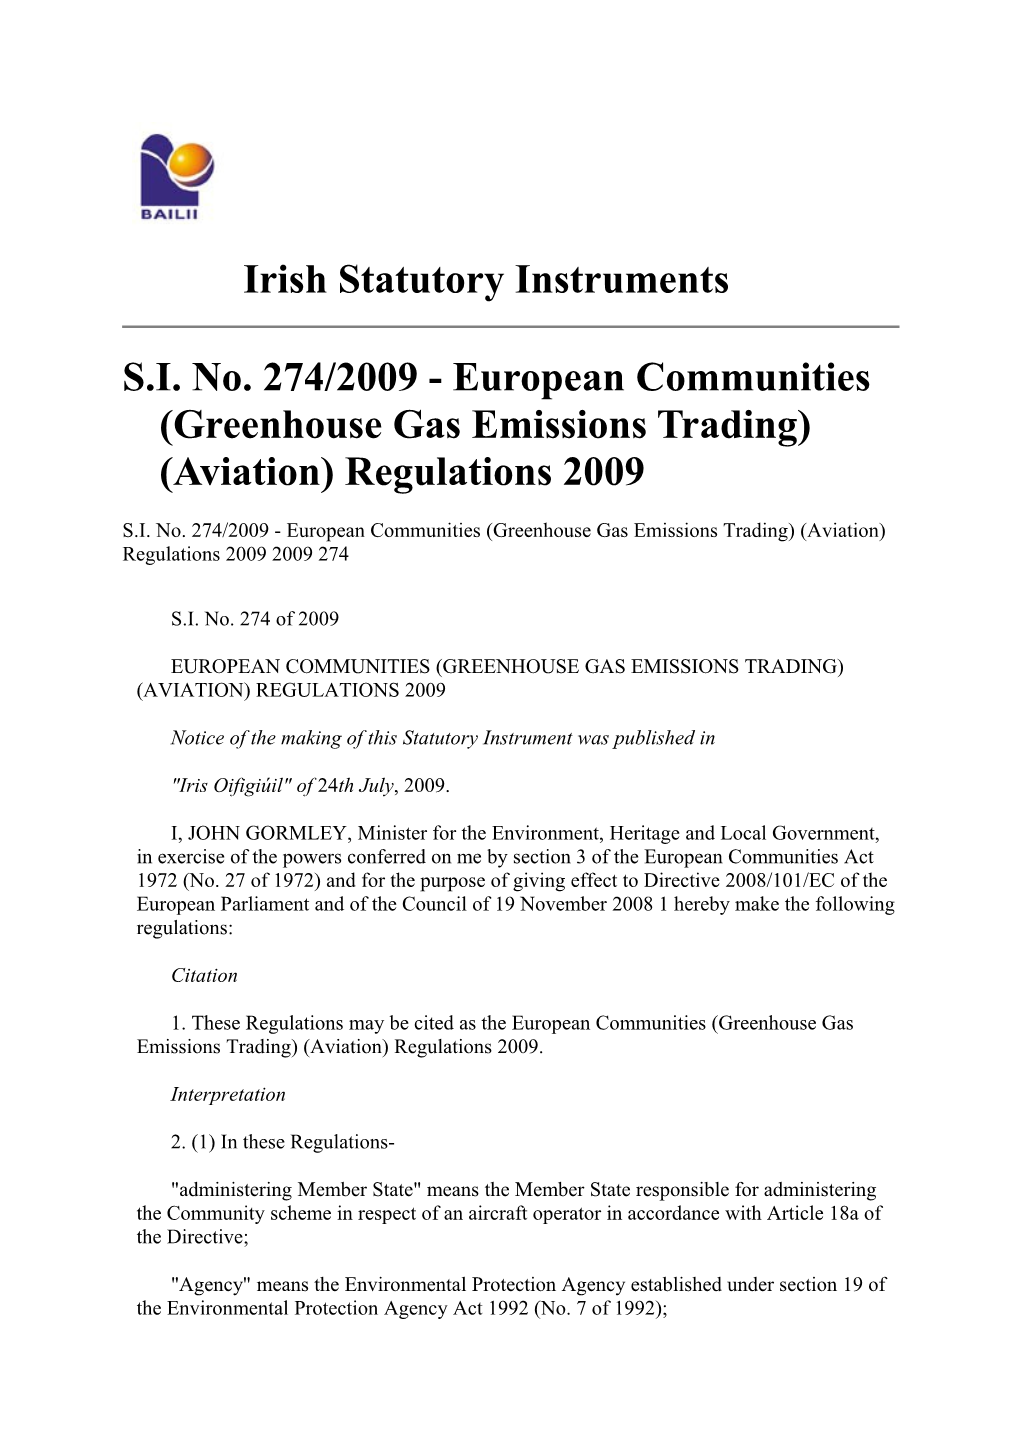 S.I. No. 274/2009 - European Communities (Greenhouse Gas Emissions Trading) (Aviation)